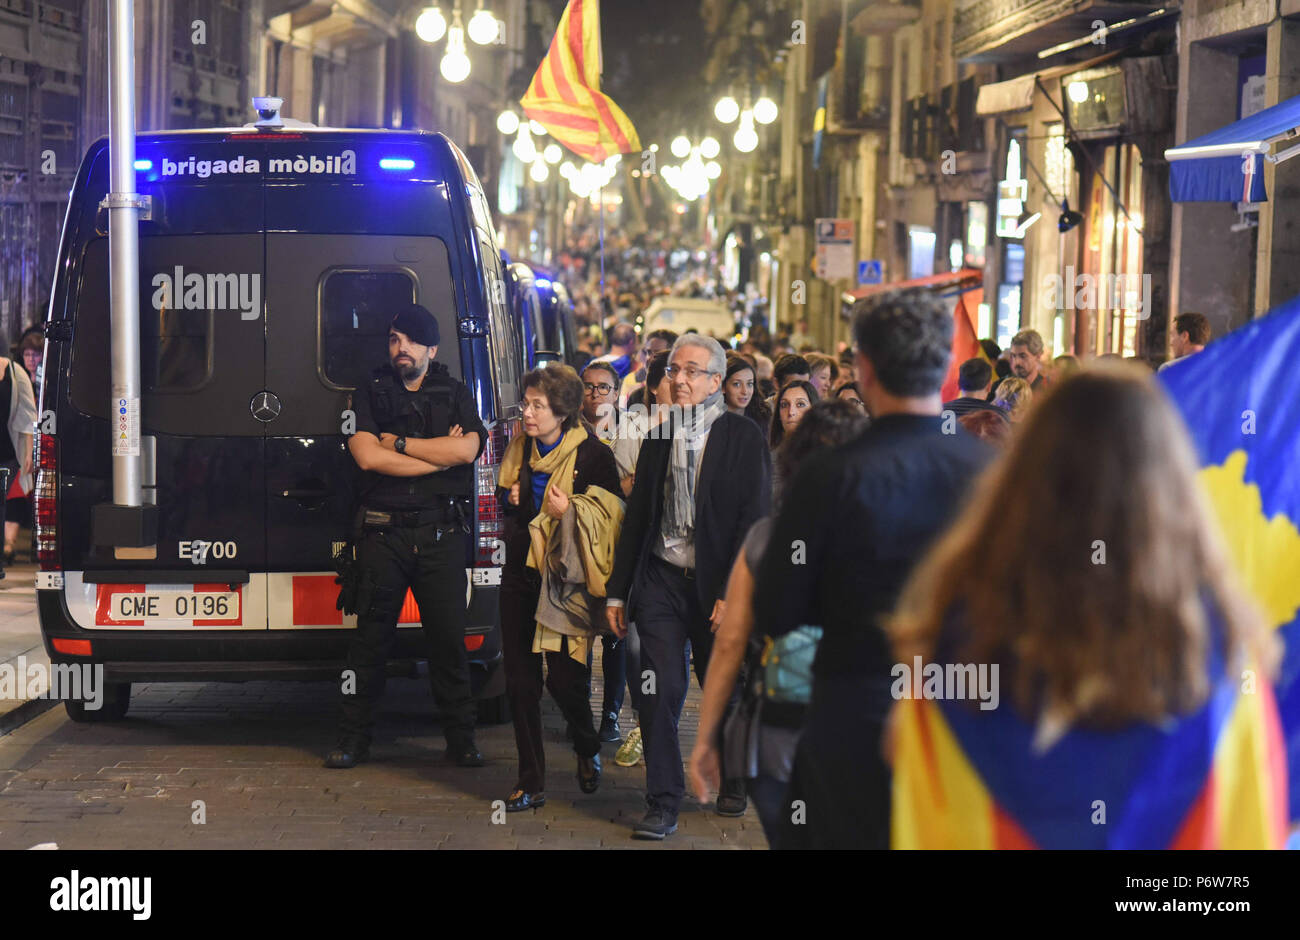 October 27, 2017 - Barcelona, Spain: A police officer from the Mossos d'Esquadra, the Catalan police force, stand guard as pro-independence Catalans celebrate in the streets after the declaration of independence.  Rassemblement festif dans les rues de Barcelone apres la declaration unilaterale d'independance. *** FRANCE OUT / NO SALES TO FRENCH MEDIA *** Stock Photo